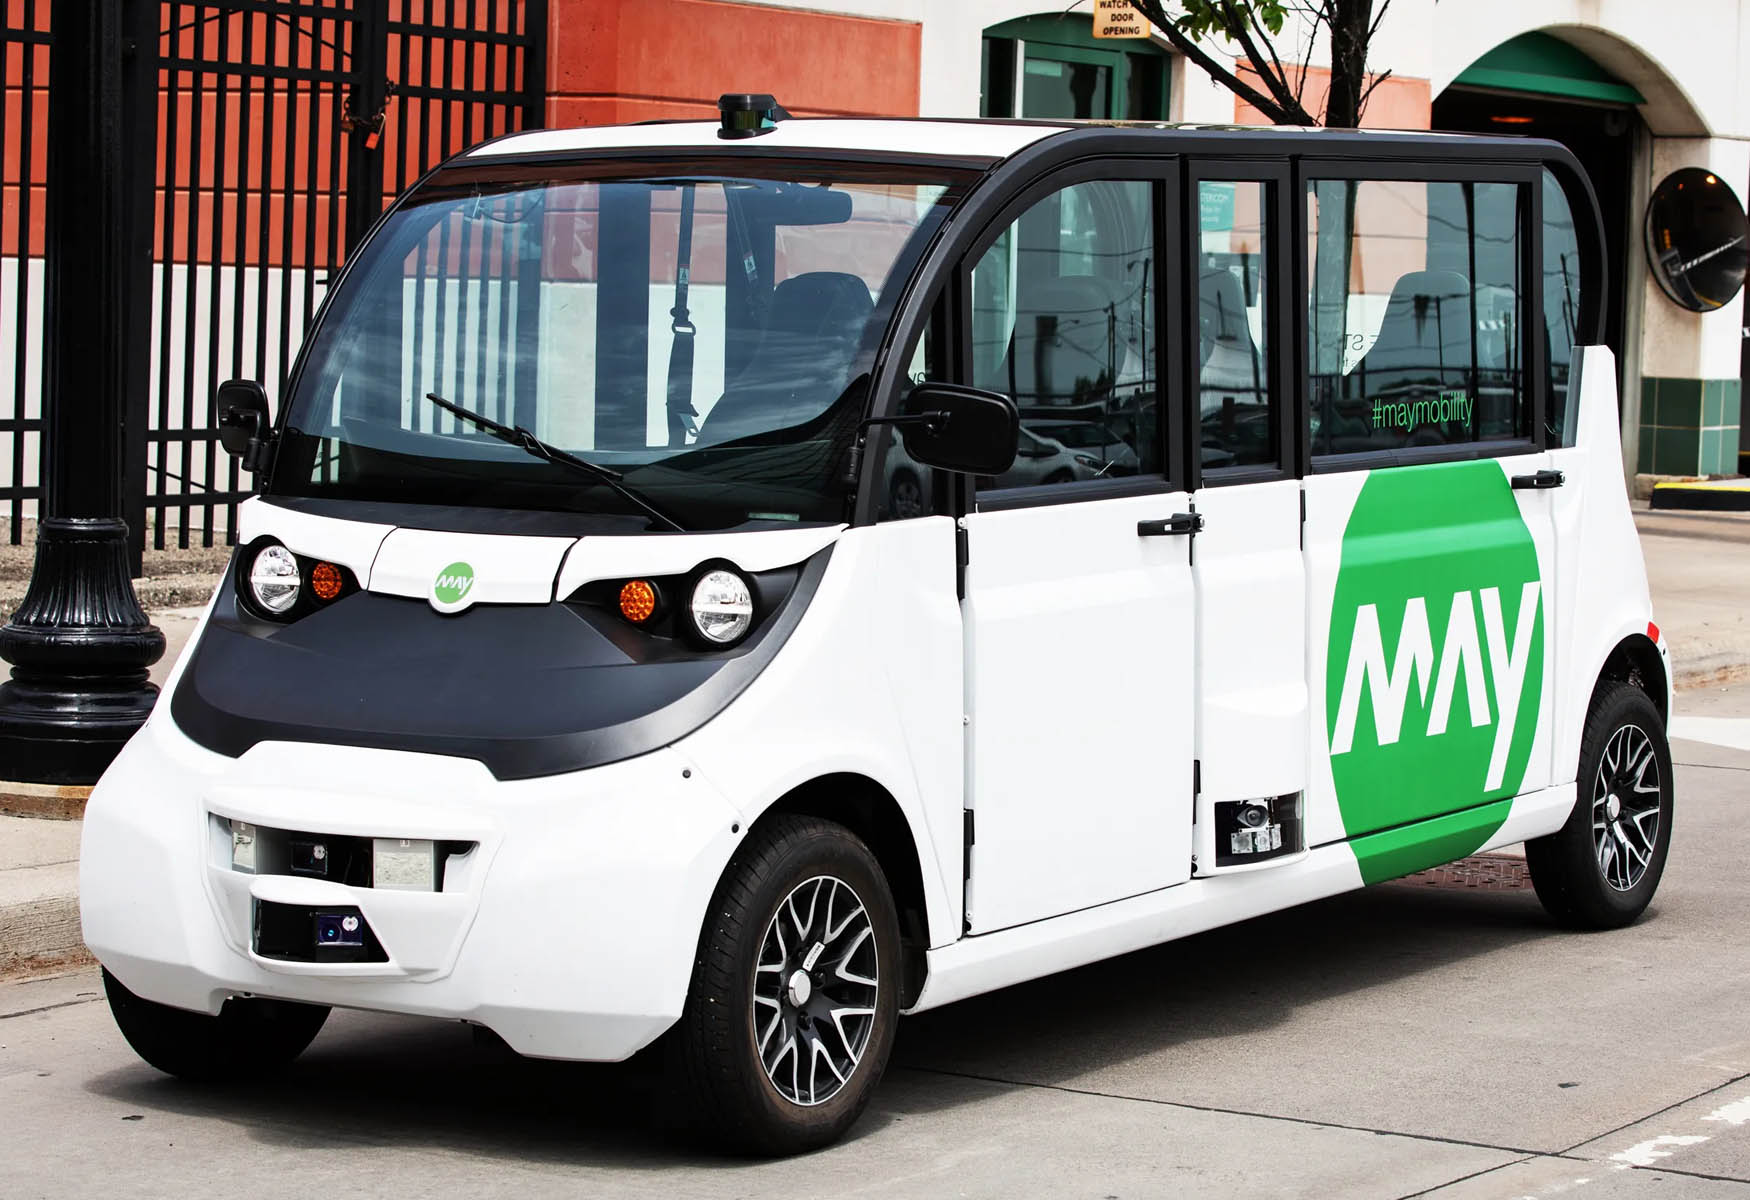 may-mobilitys-driverless-microtransit-service-launches-in-sun-city-arizona